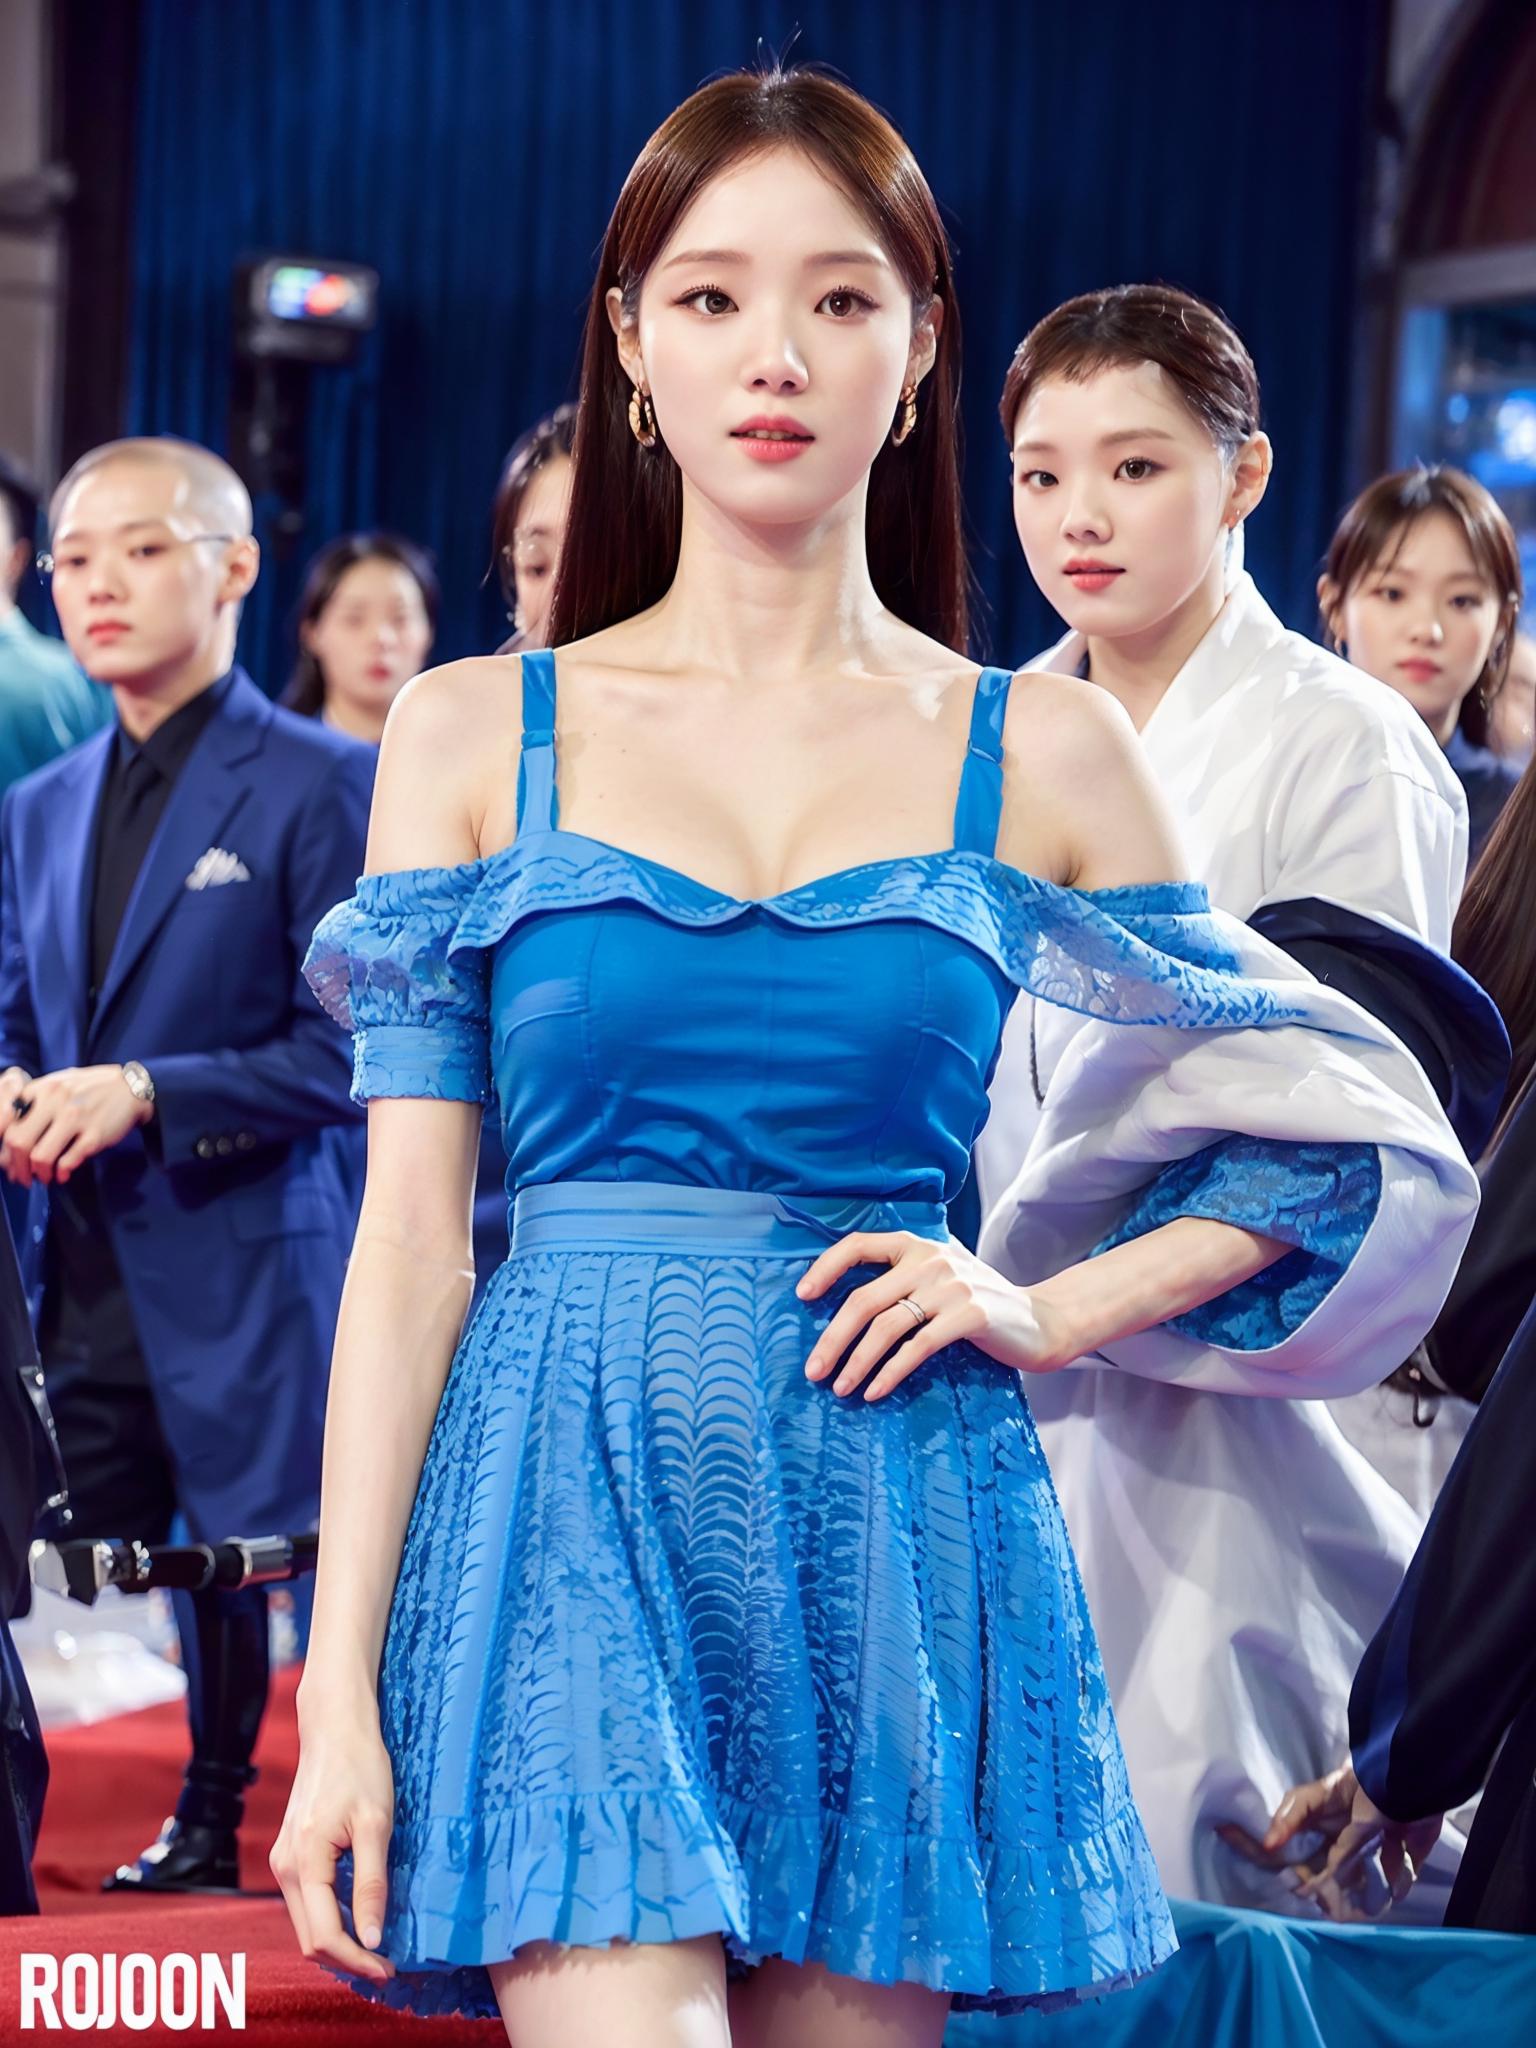 Lee Sung-kyung (이성경) image by Potaters